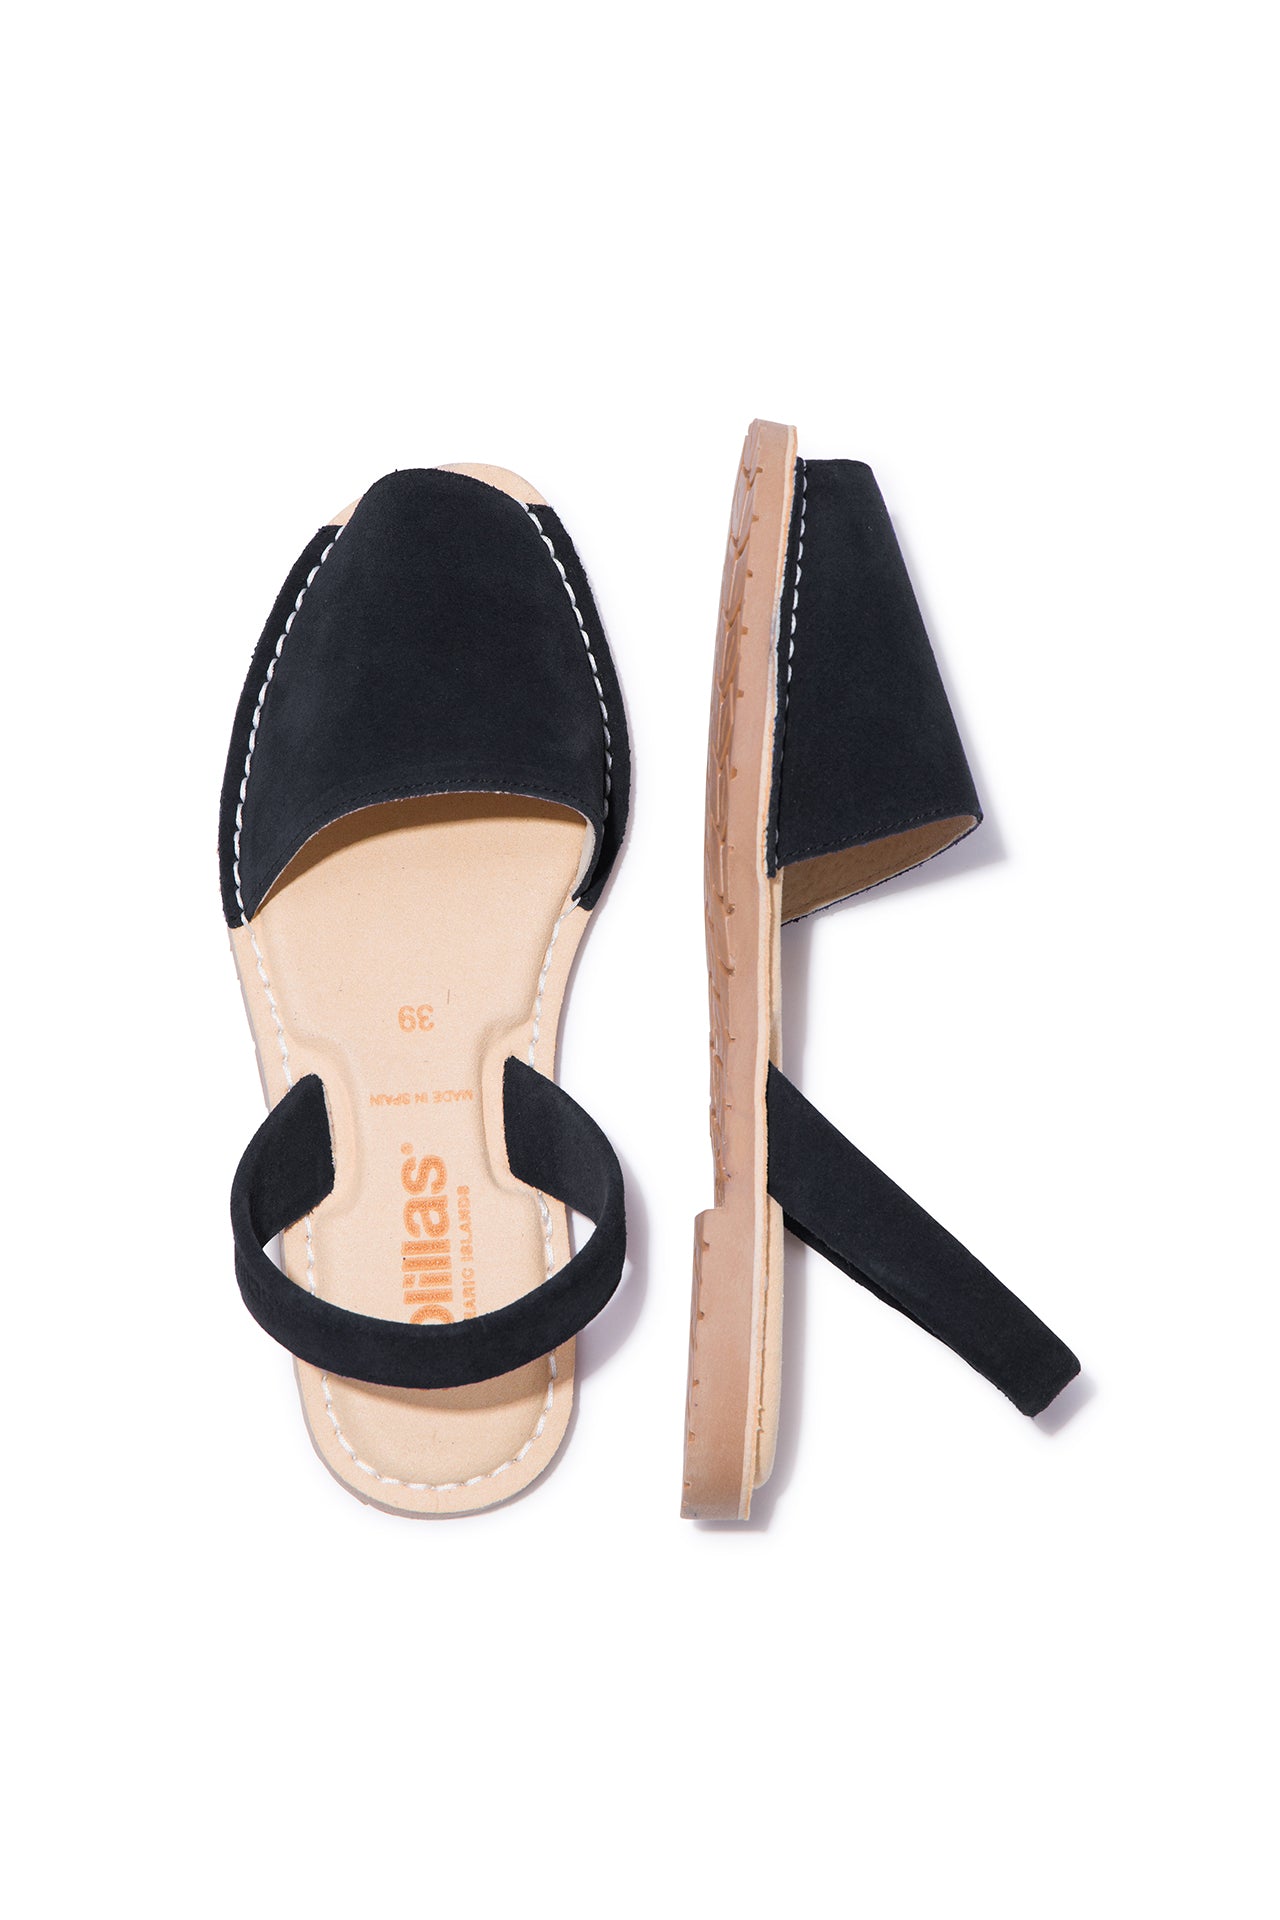 Noche Mimoso - Original Menorcan Sandals in Black Nubuck Leather with Padded Insole